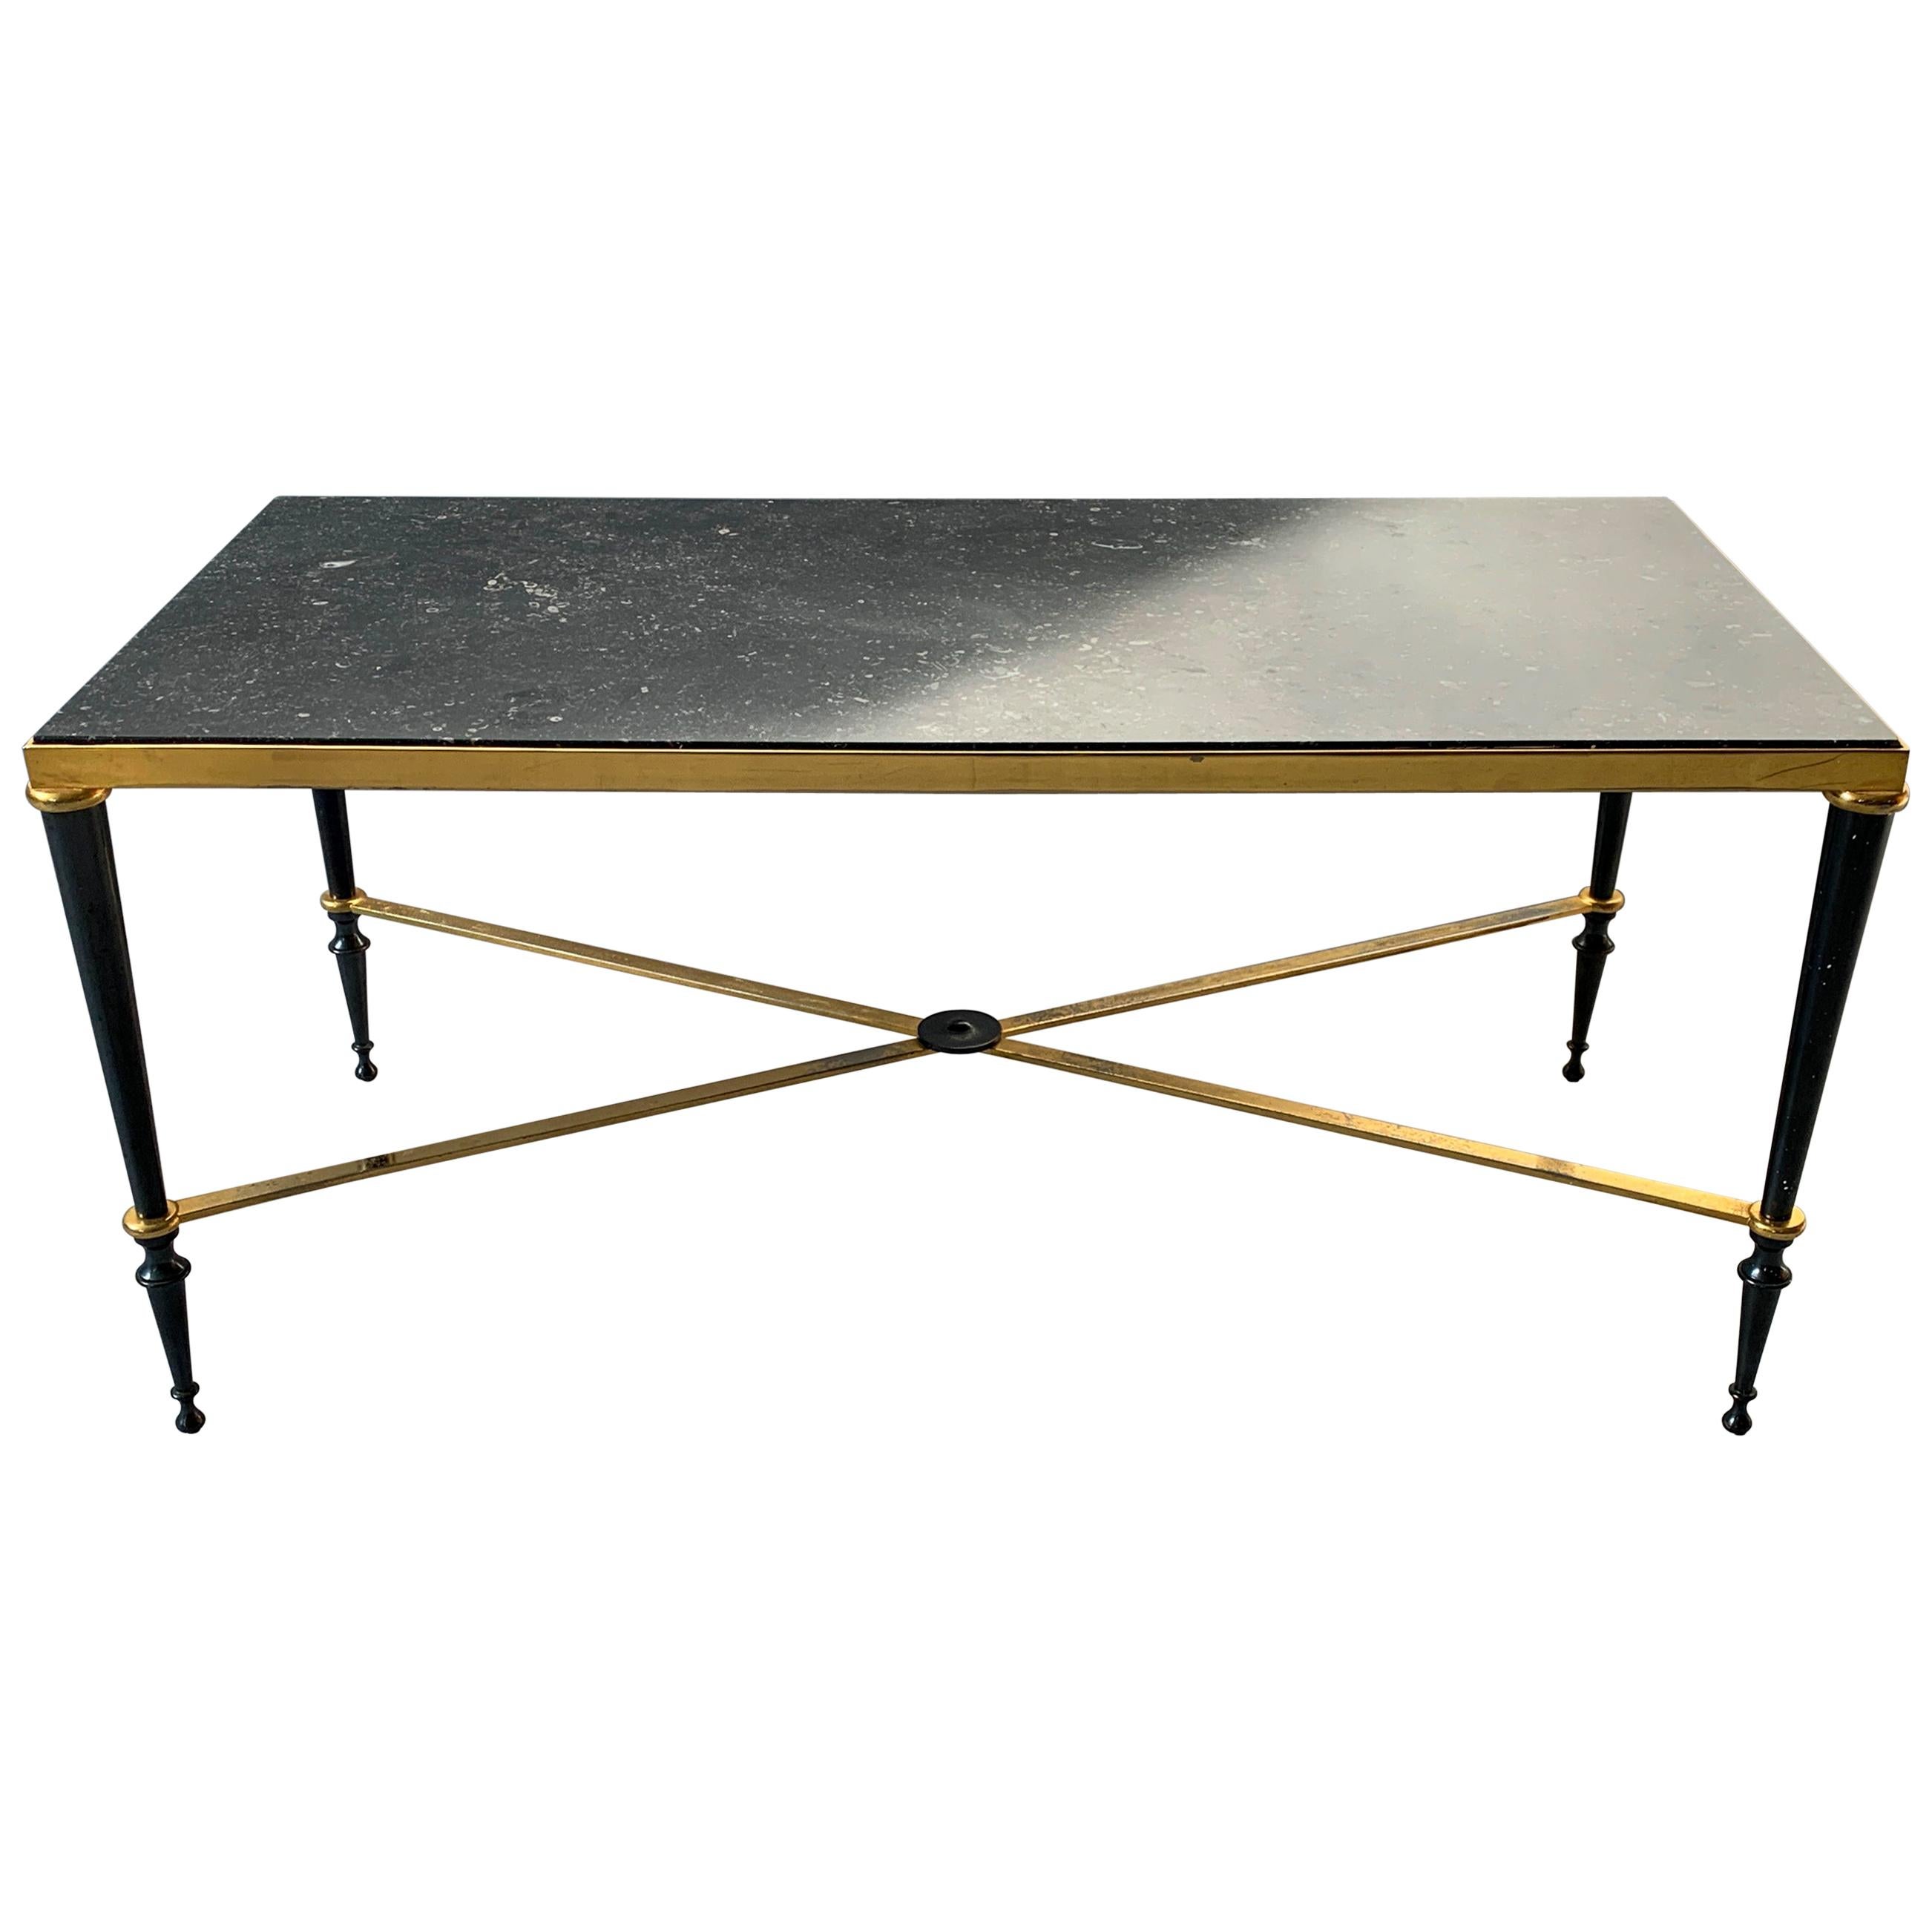 Neoclassical French Brass-Plated Coffee Table with Marble Top